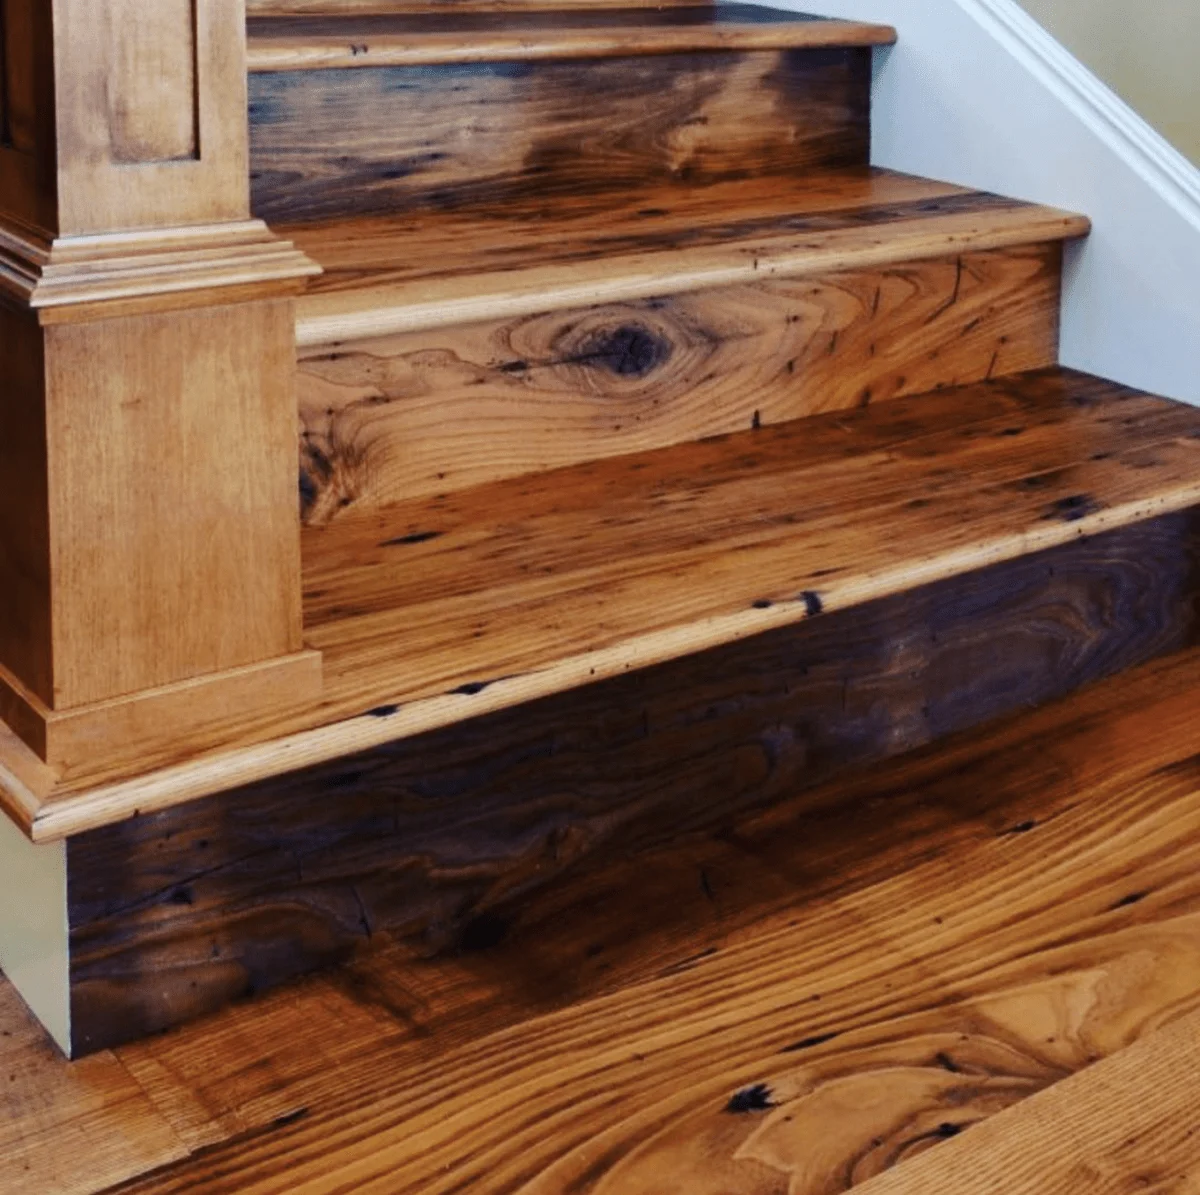 A rich in character reclaimed wood stair treads